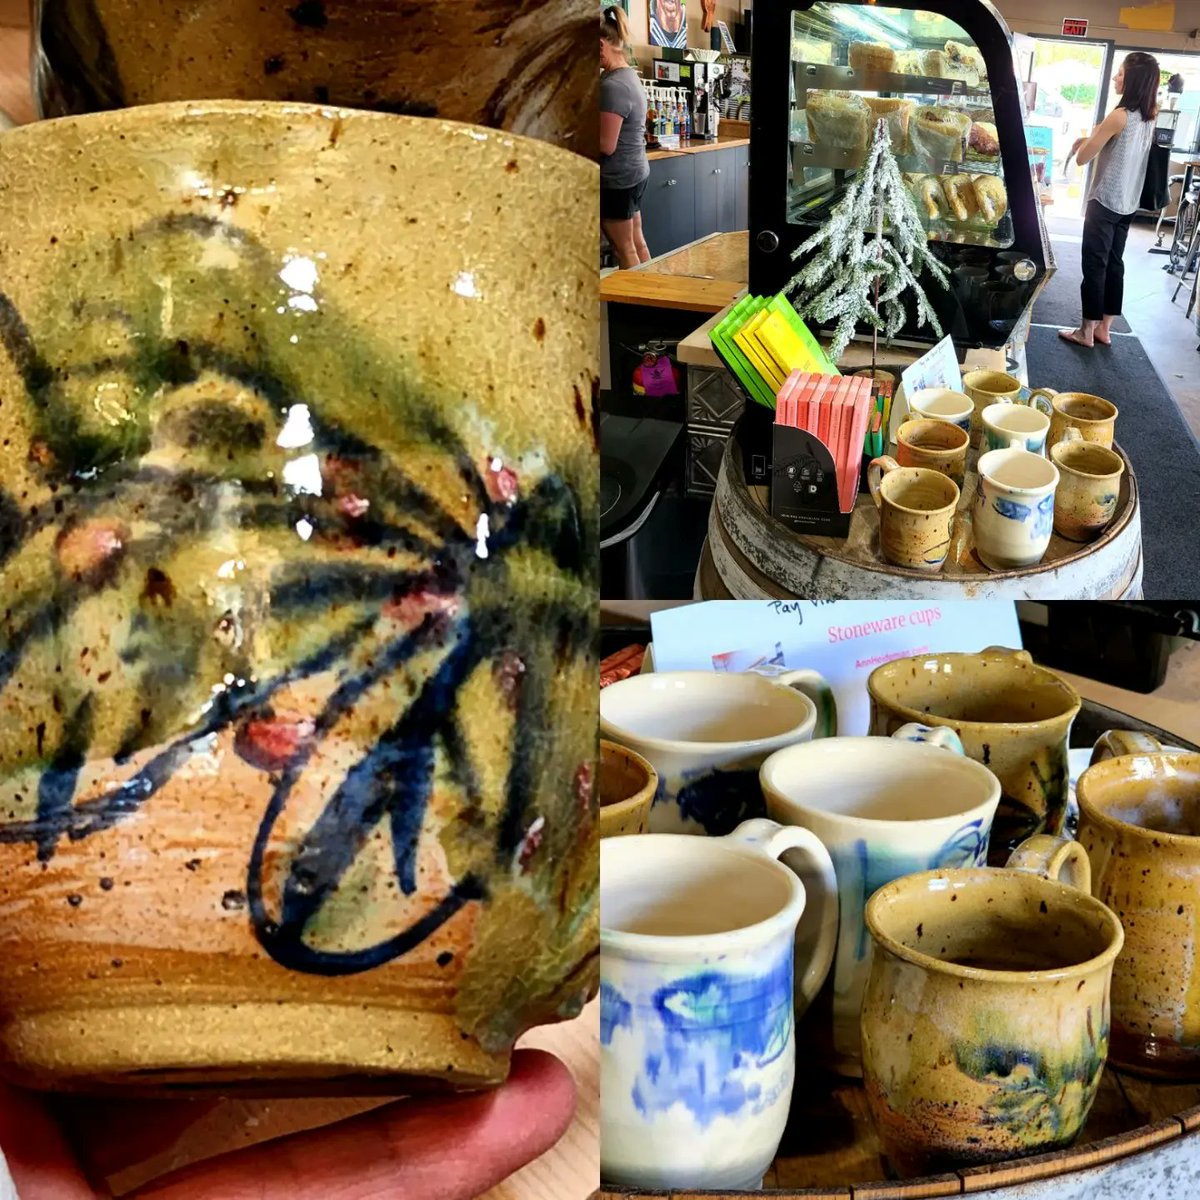 #ceramiccups now.for sale @pioneercafenortbend.
Drop by for some tastey snacks, delicious #coffee and a sweet #coffeemug
#pioneercoffee #northbend #northbendwa #ceramicsforsale #coffeelife #coffeelifestyle #mugs #coffee cups #pnwlifestyle